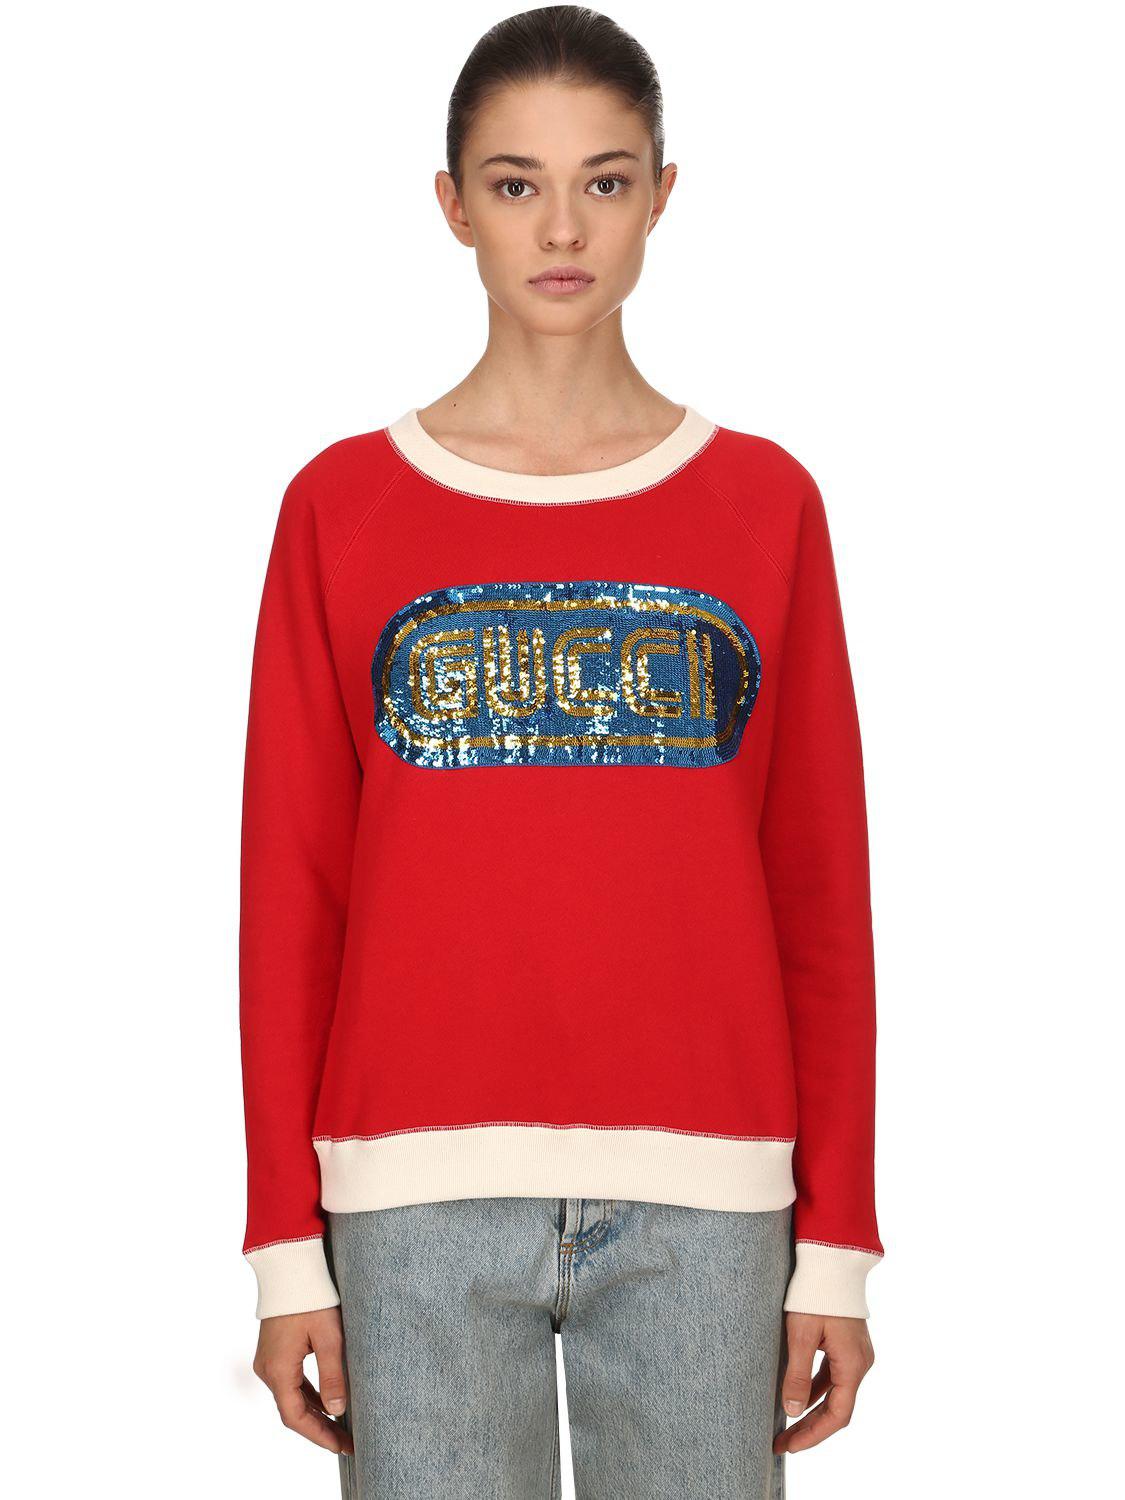  Gucci  Sequined Cotton Sweatshirt  in Red  Lyst